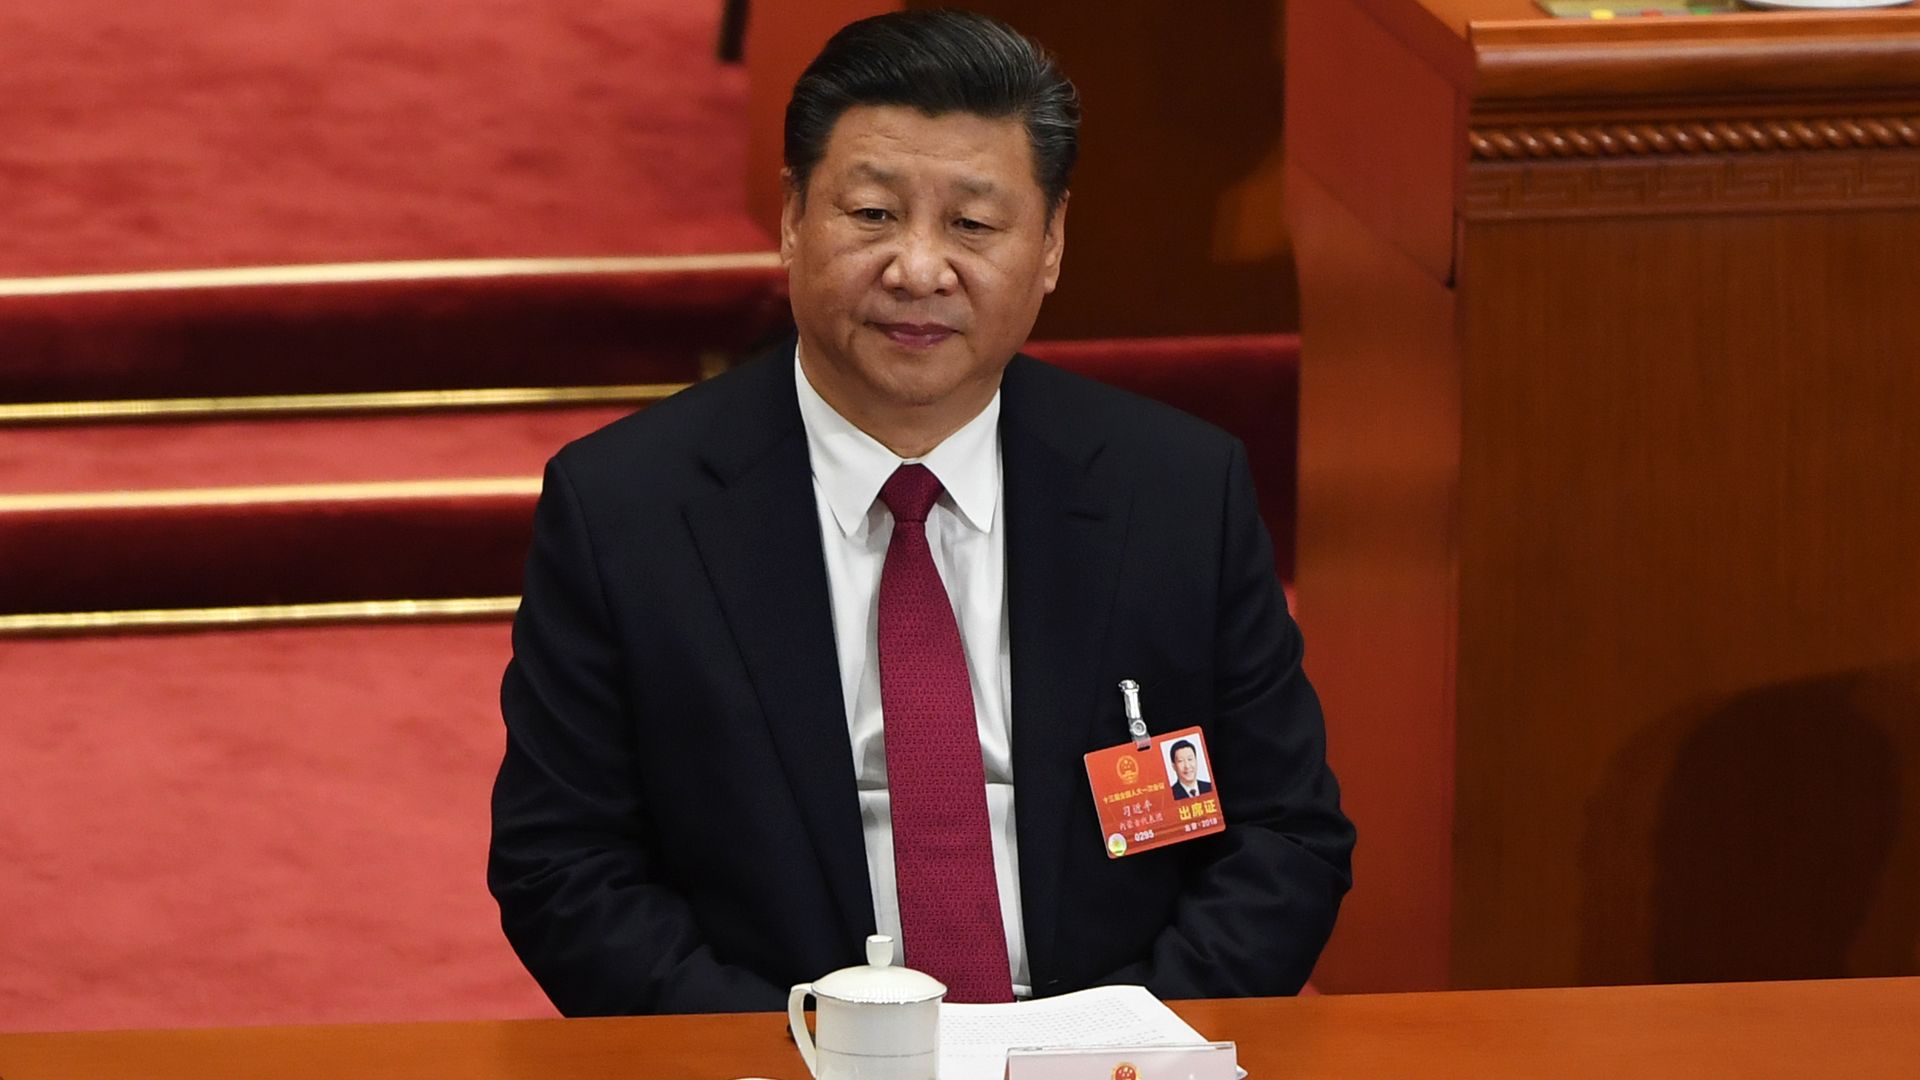  China's President Xi Jinping attends the second plenary session of the first session of the 13th National People's Congress (NPC) at the Great Hall of the People in Beijing March 9, 2018.